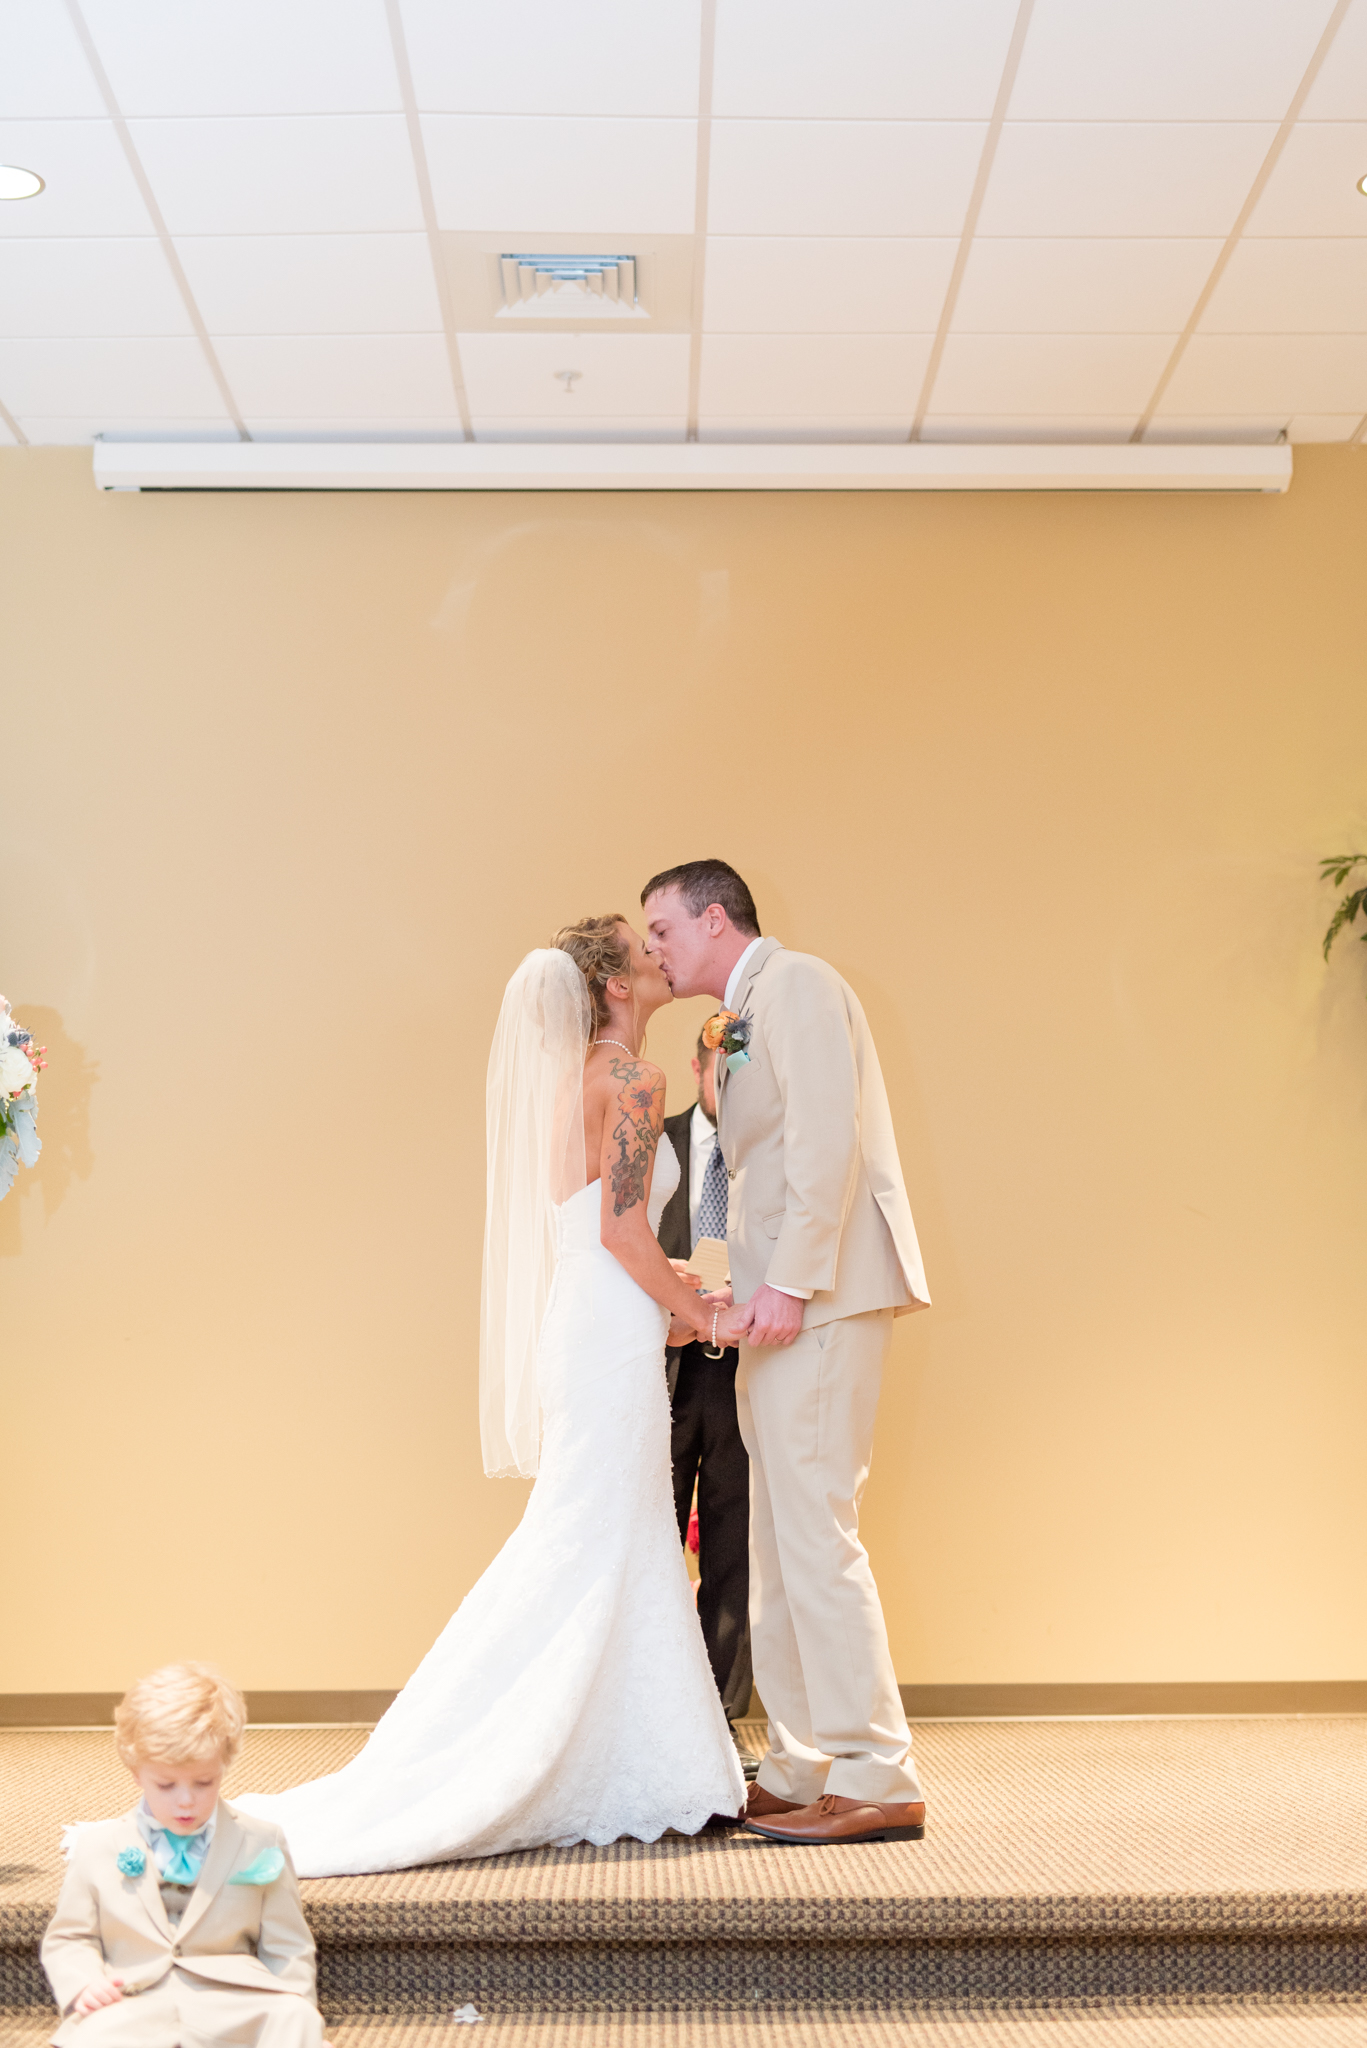 Bride and groom kiss during wedding ceremony.